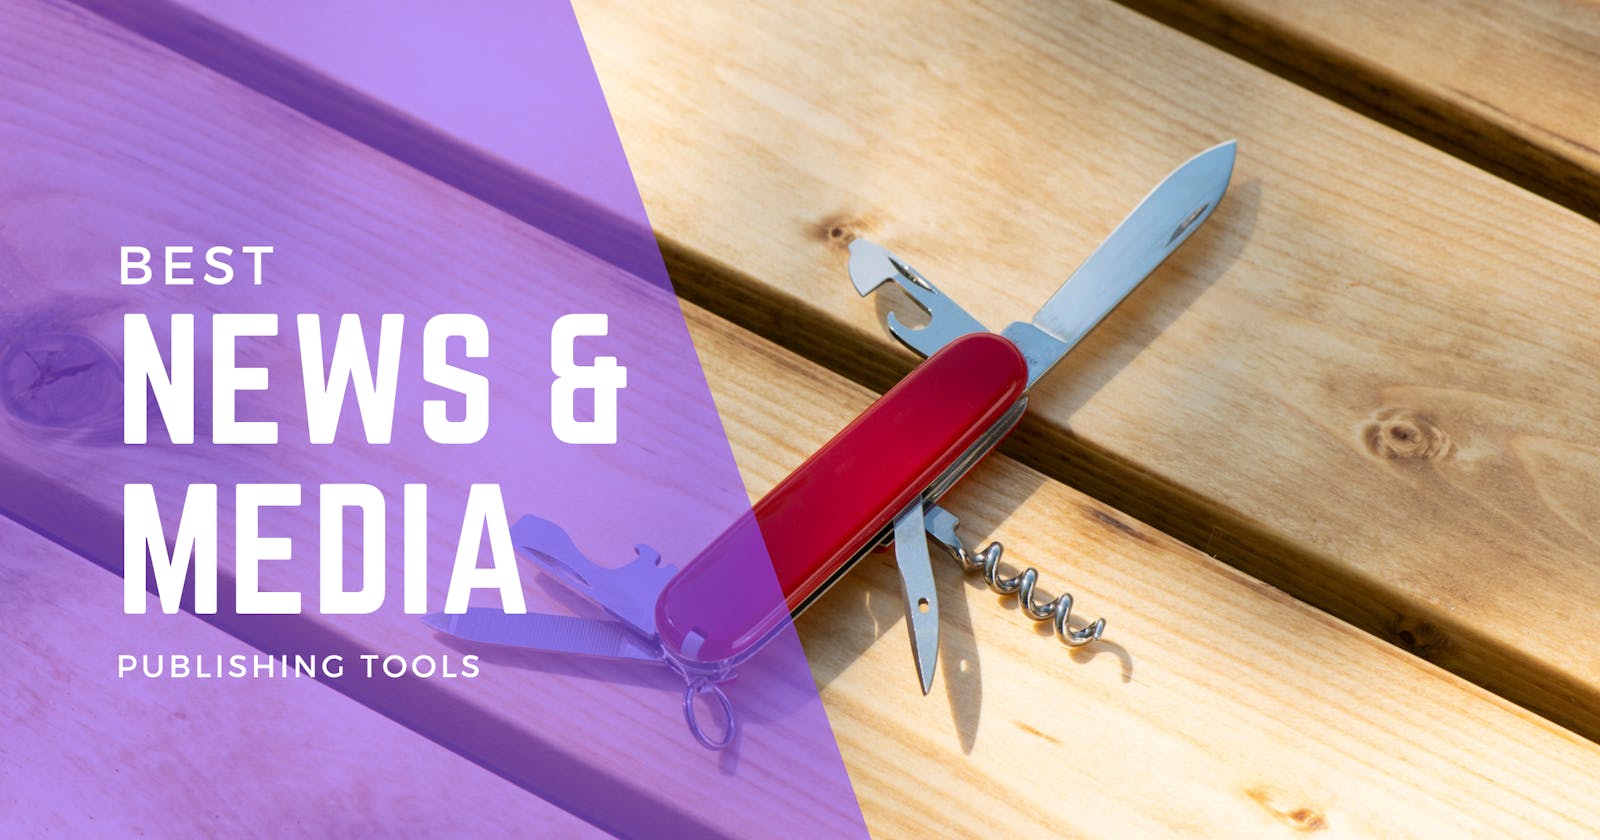 4 Amazing Tools for Media and Content Publishing Businesses